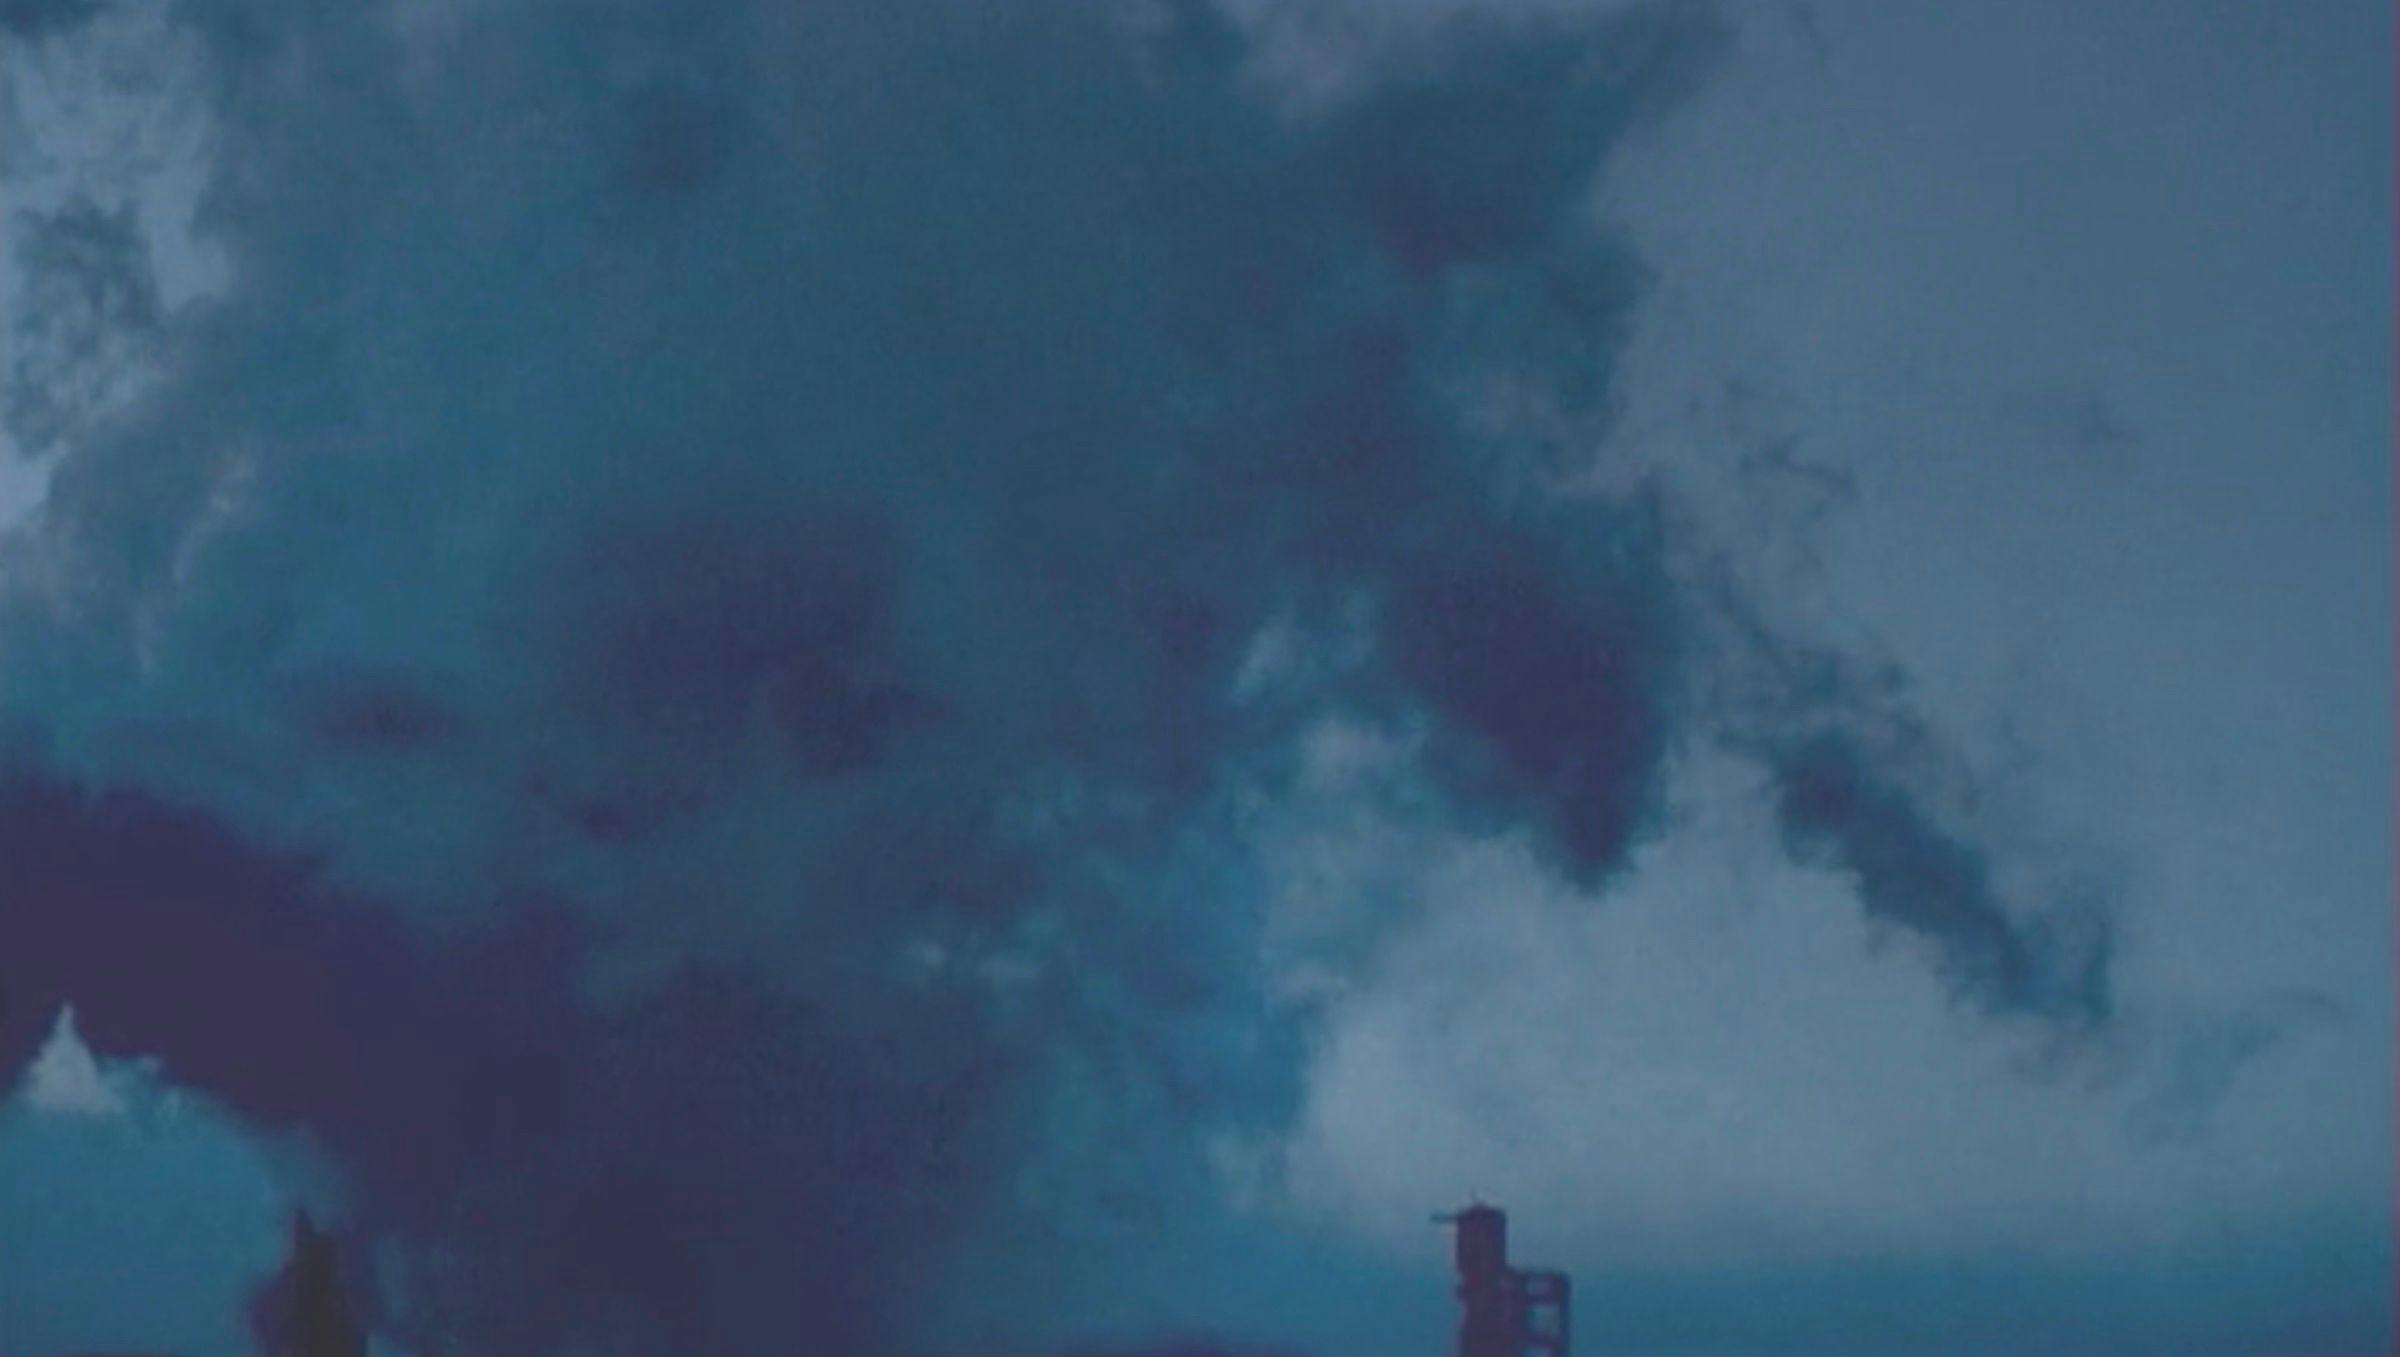 Image of a darkened cloudy sky with dark clouds covering the majority of the image. The top of a chimney is visible in the foreground.